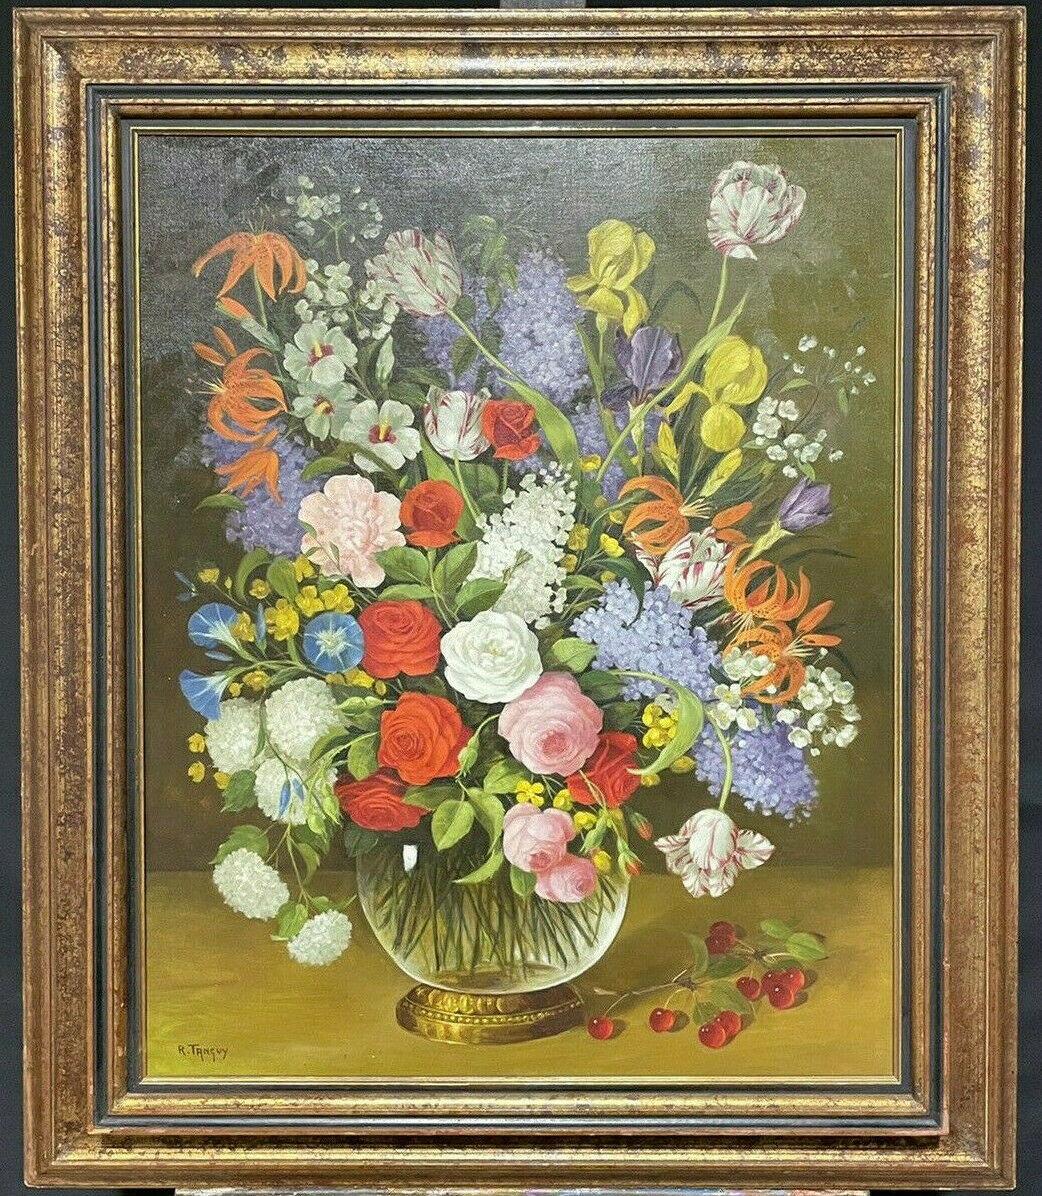 R. Tanguy Landscape Painting - FINE FRENCH STILL LIFE ORNAMENTAL FLOWERS IN GLASS VASE - SIGNED OIL - LARGE